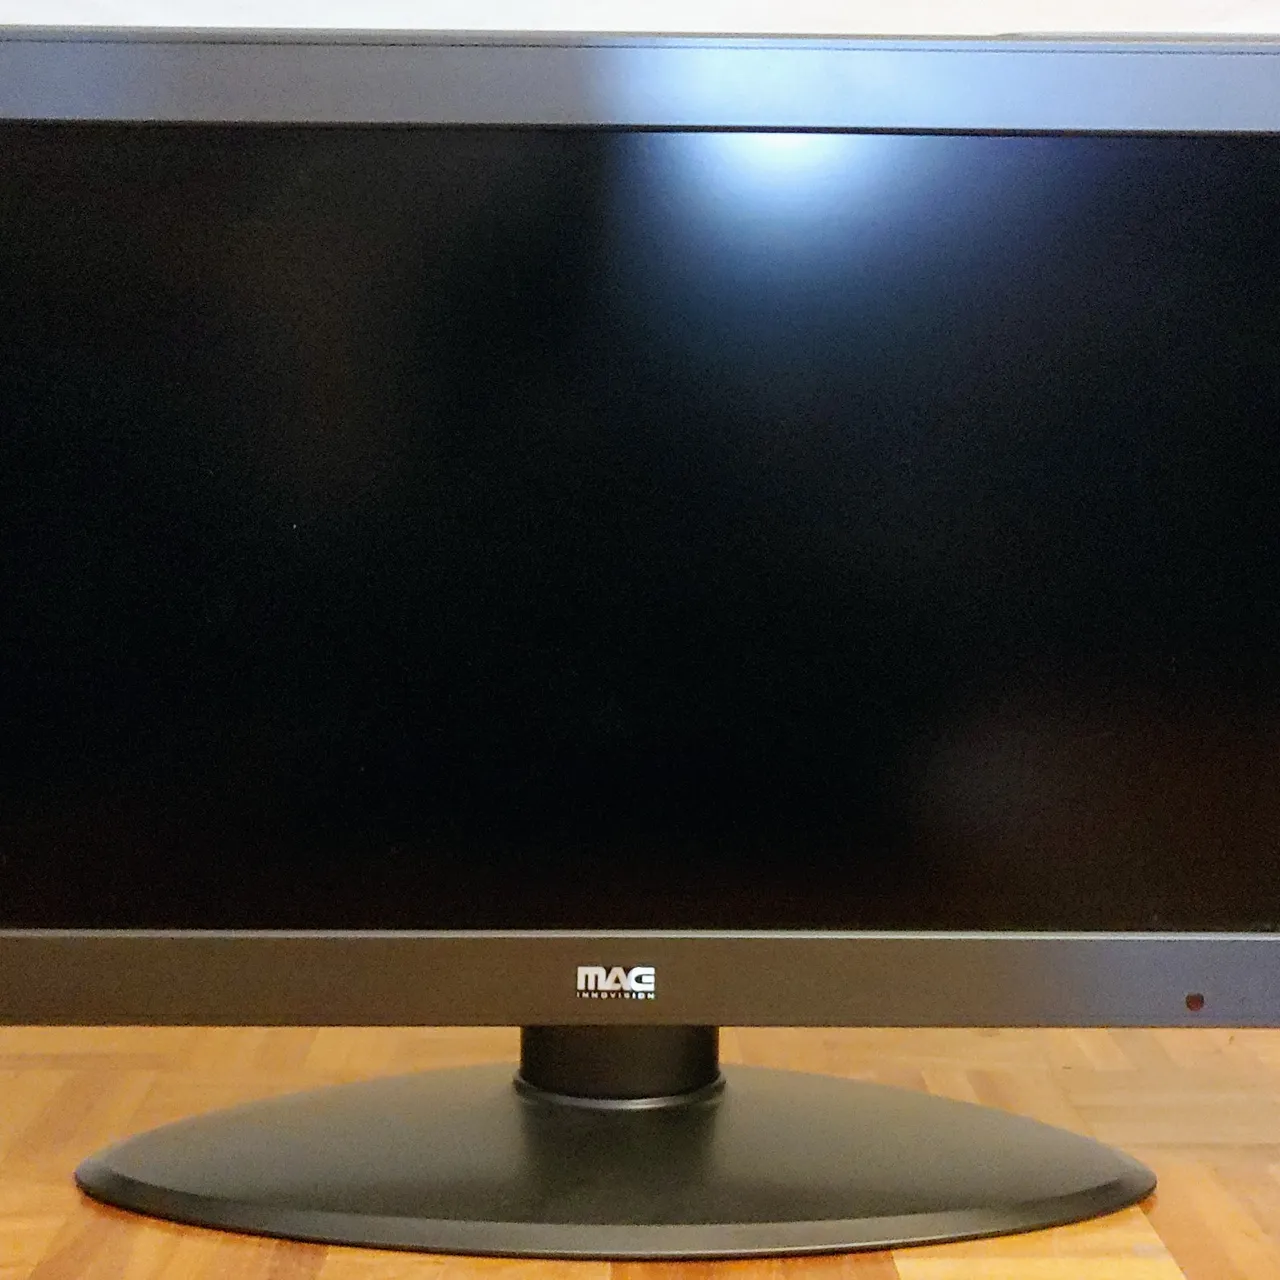 MAG InnoVision Proview RX-276 27.6" 16:9 LCD TV with remote photo 1